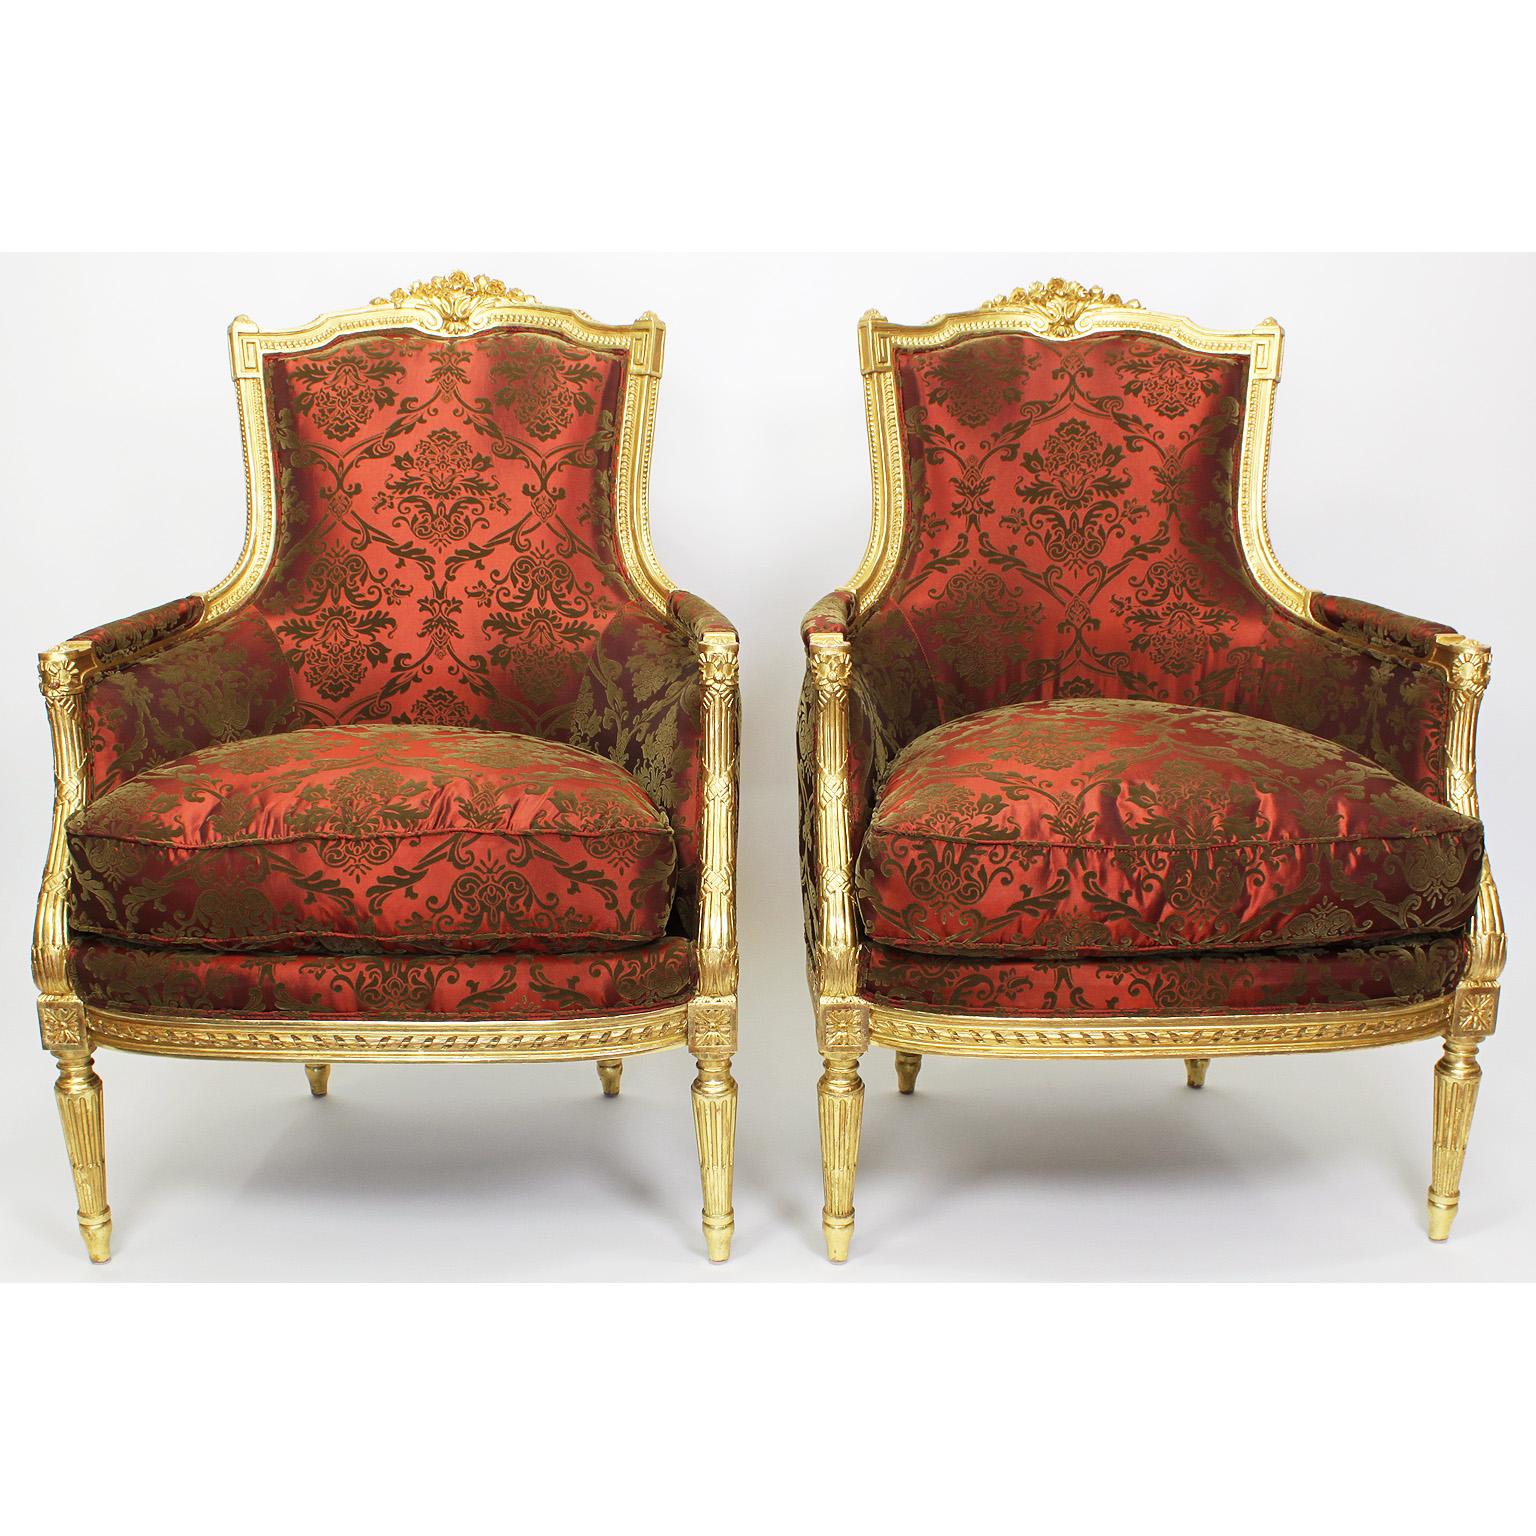 A fine pair of French 19th-20th century Louis XVI style giltwood carved bergères, the recently upholstered and restored armchairs with a padded back, sides and loose cushion seat in floral damask, crowned with a floral carving and raised on four